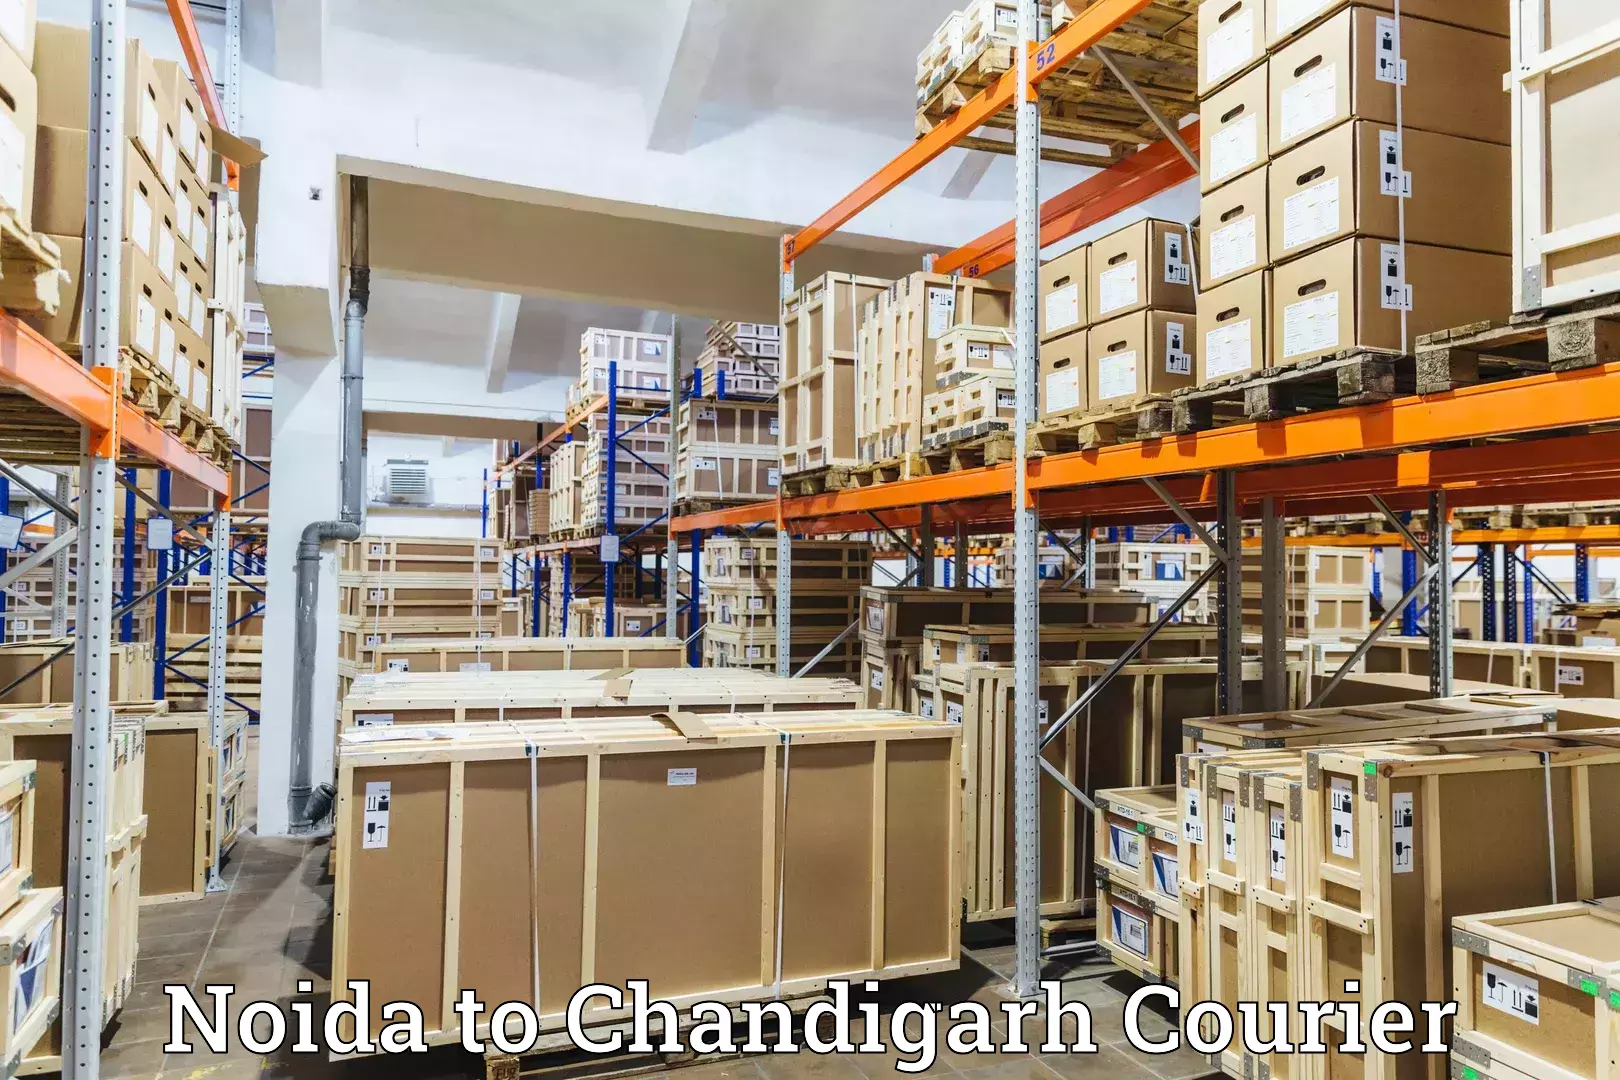 Enhanced tracking features Noida to Chandigarh